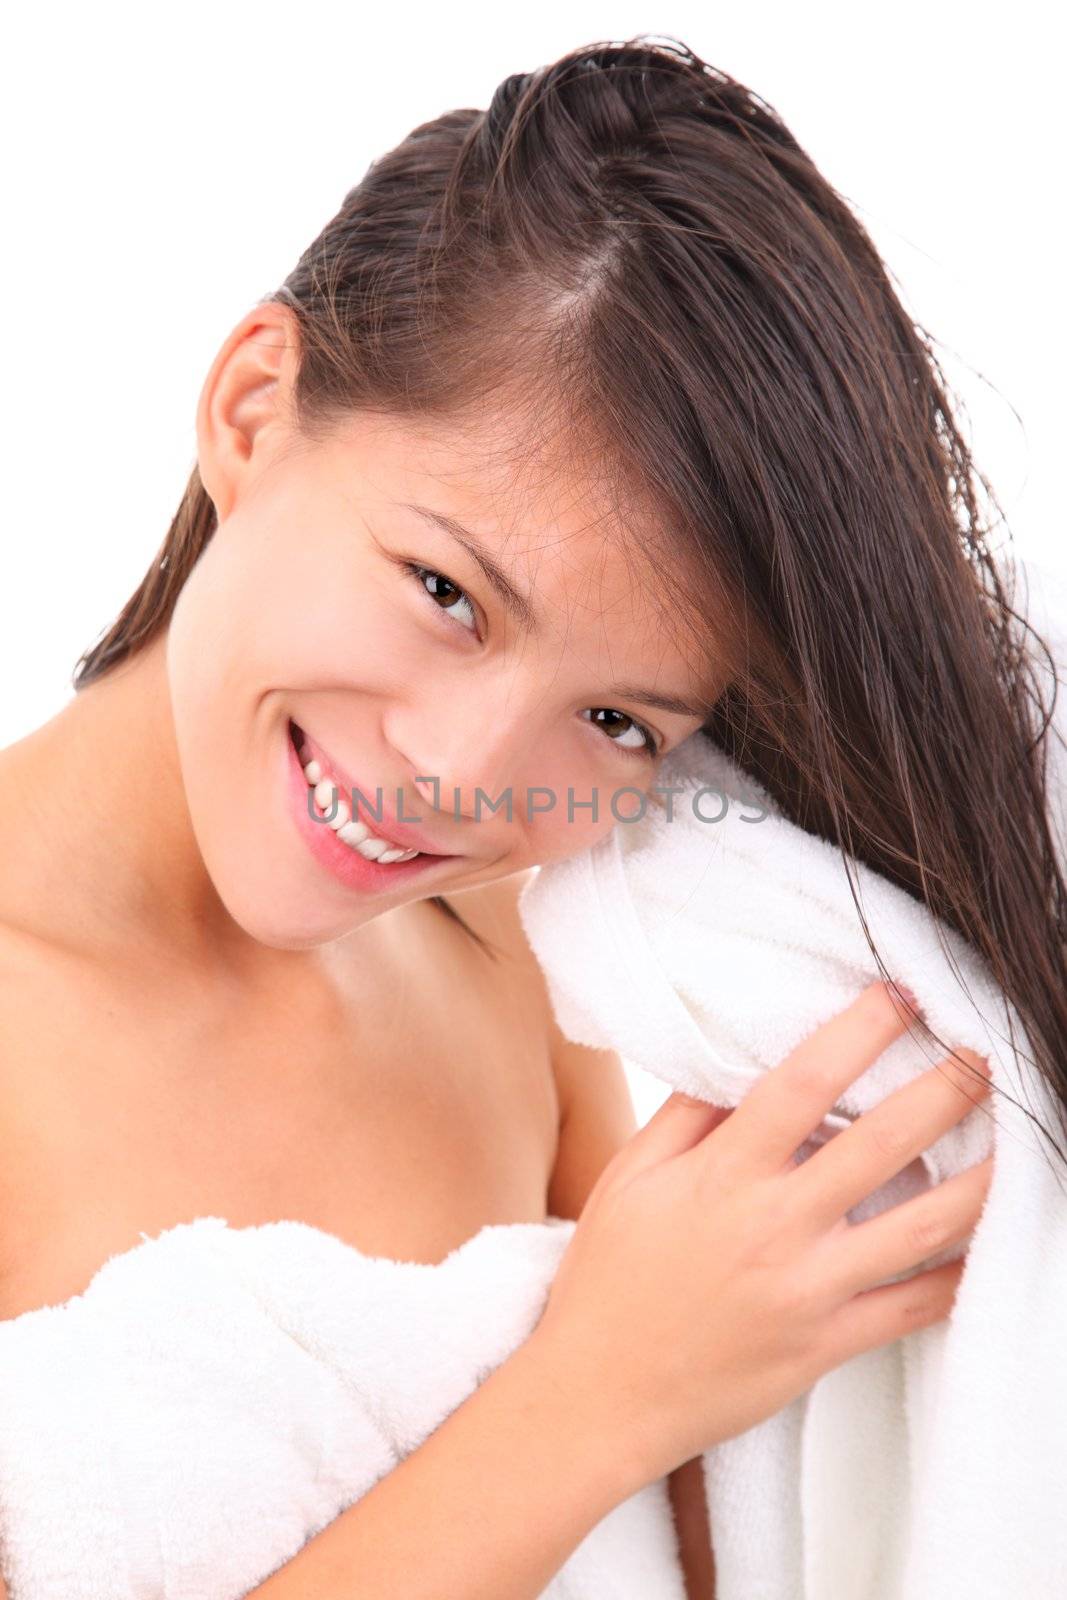 Woman drying her hair after the shower, taking care of her body. Isolated on white background.